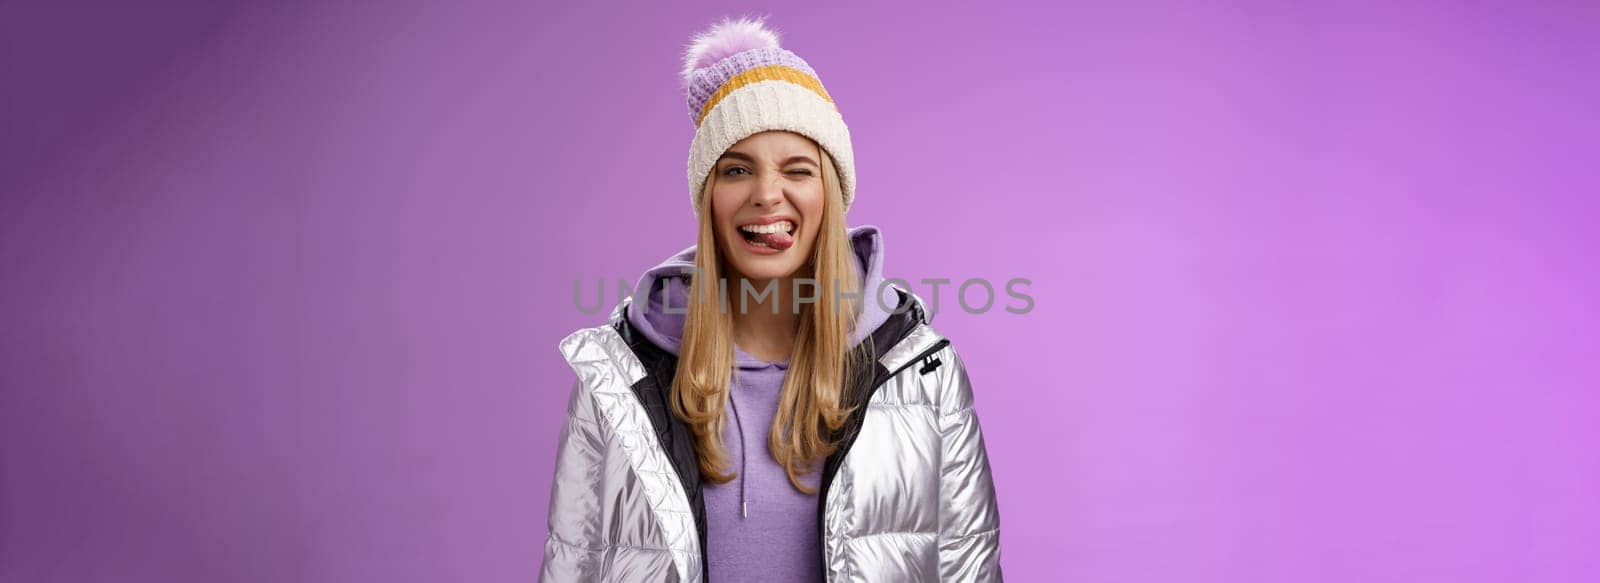 Lifestyle. Cheeky carefree delighted charming blond girl having fun feel amused positive show tongue smiling broadly wearing winter silver glittering jacket stylish hat enjoying awesome ski vacation.